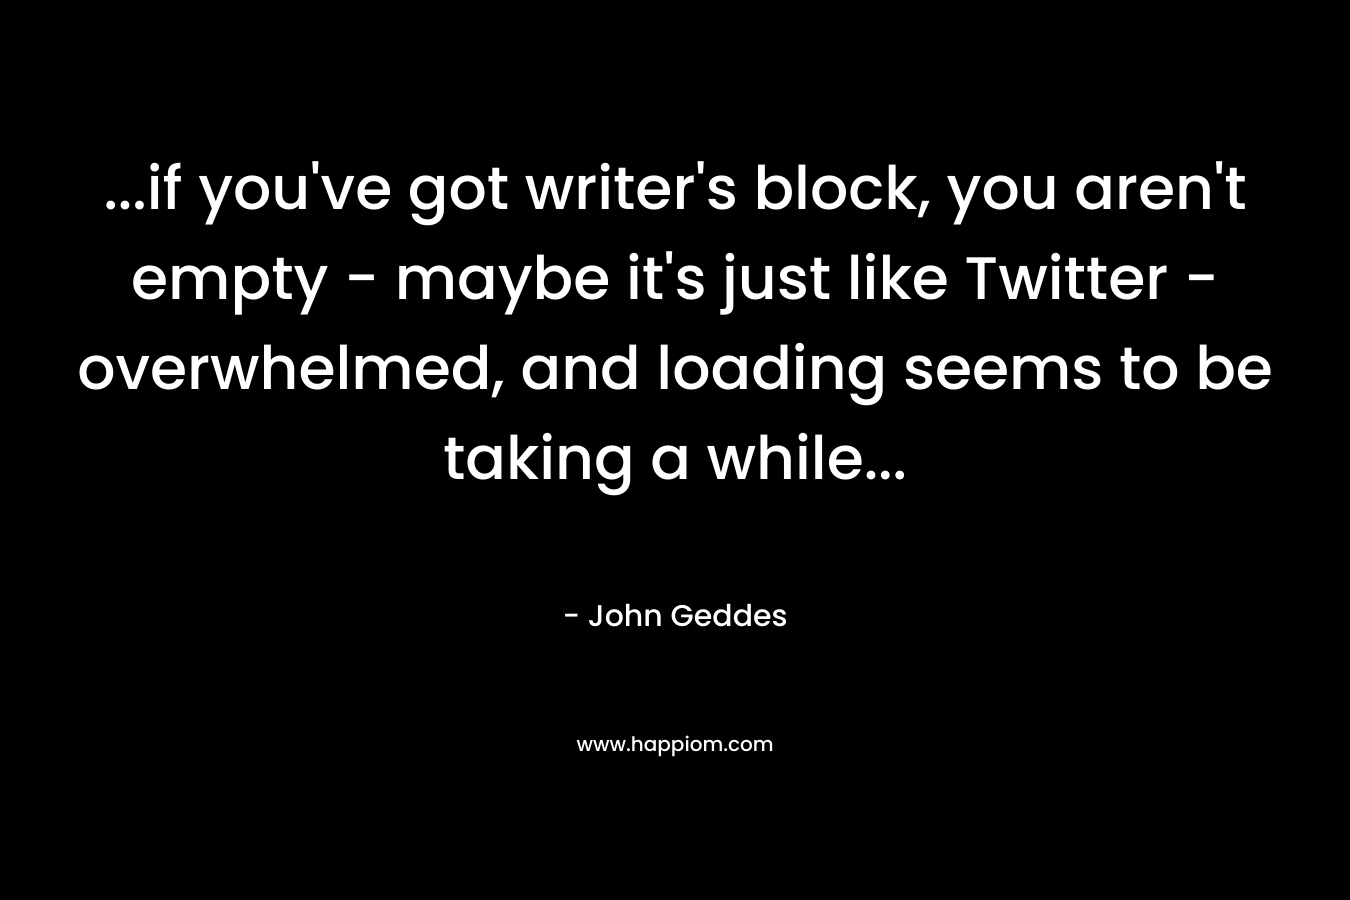 ...if you've got writer's block, you aren't empty - maybe it's just like Twitter - overwhelmed, and loading seems to be taking a while...